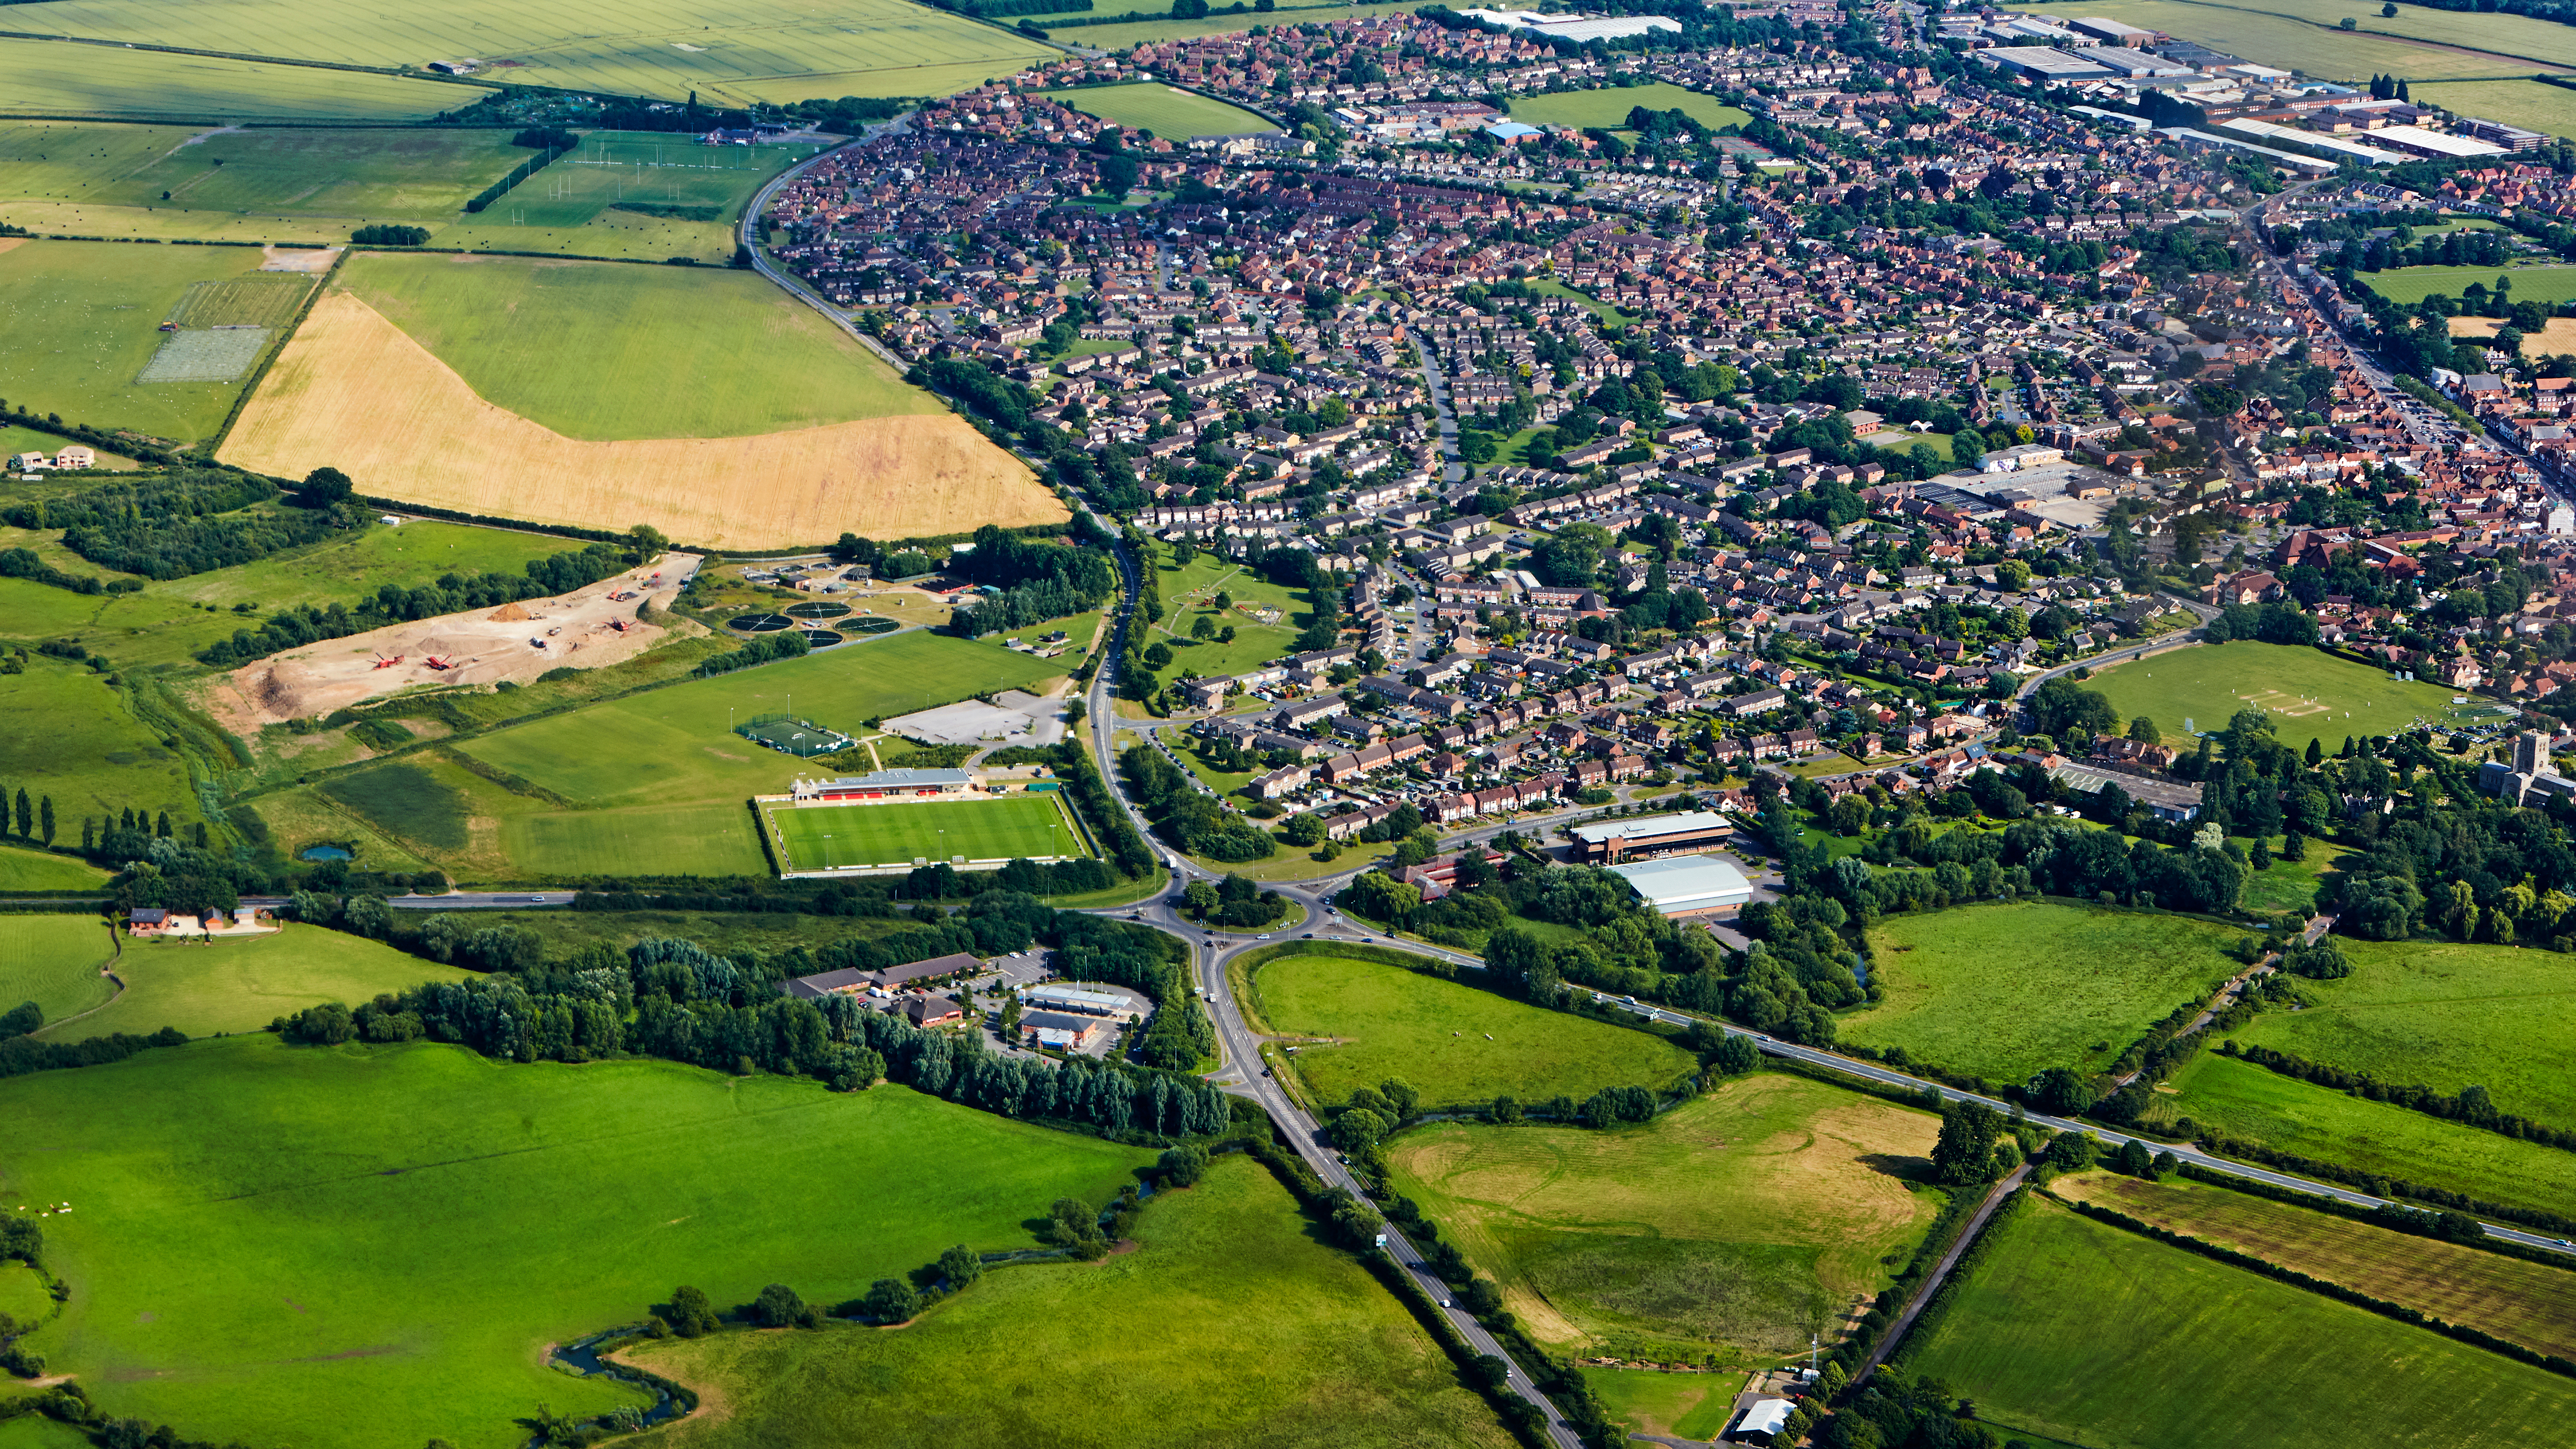 Aerial view of the small Oxfordshire town of Thame in rural England